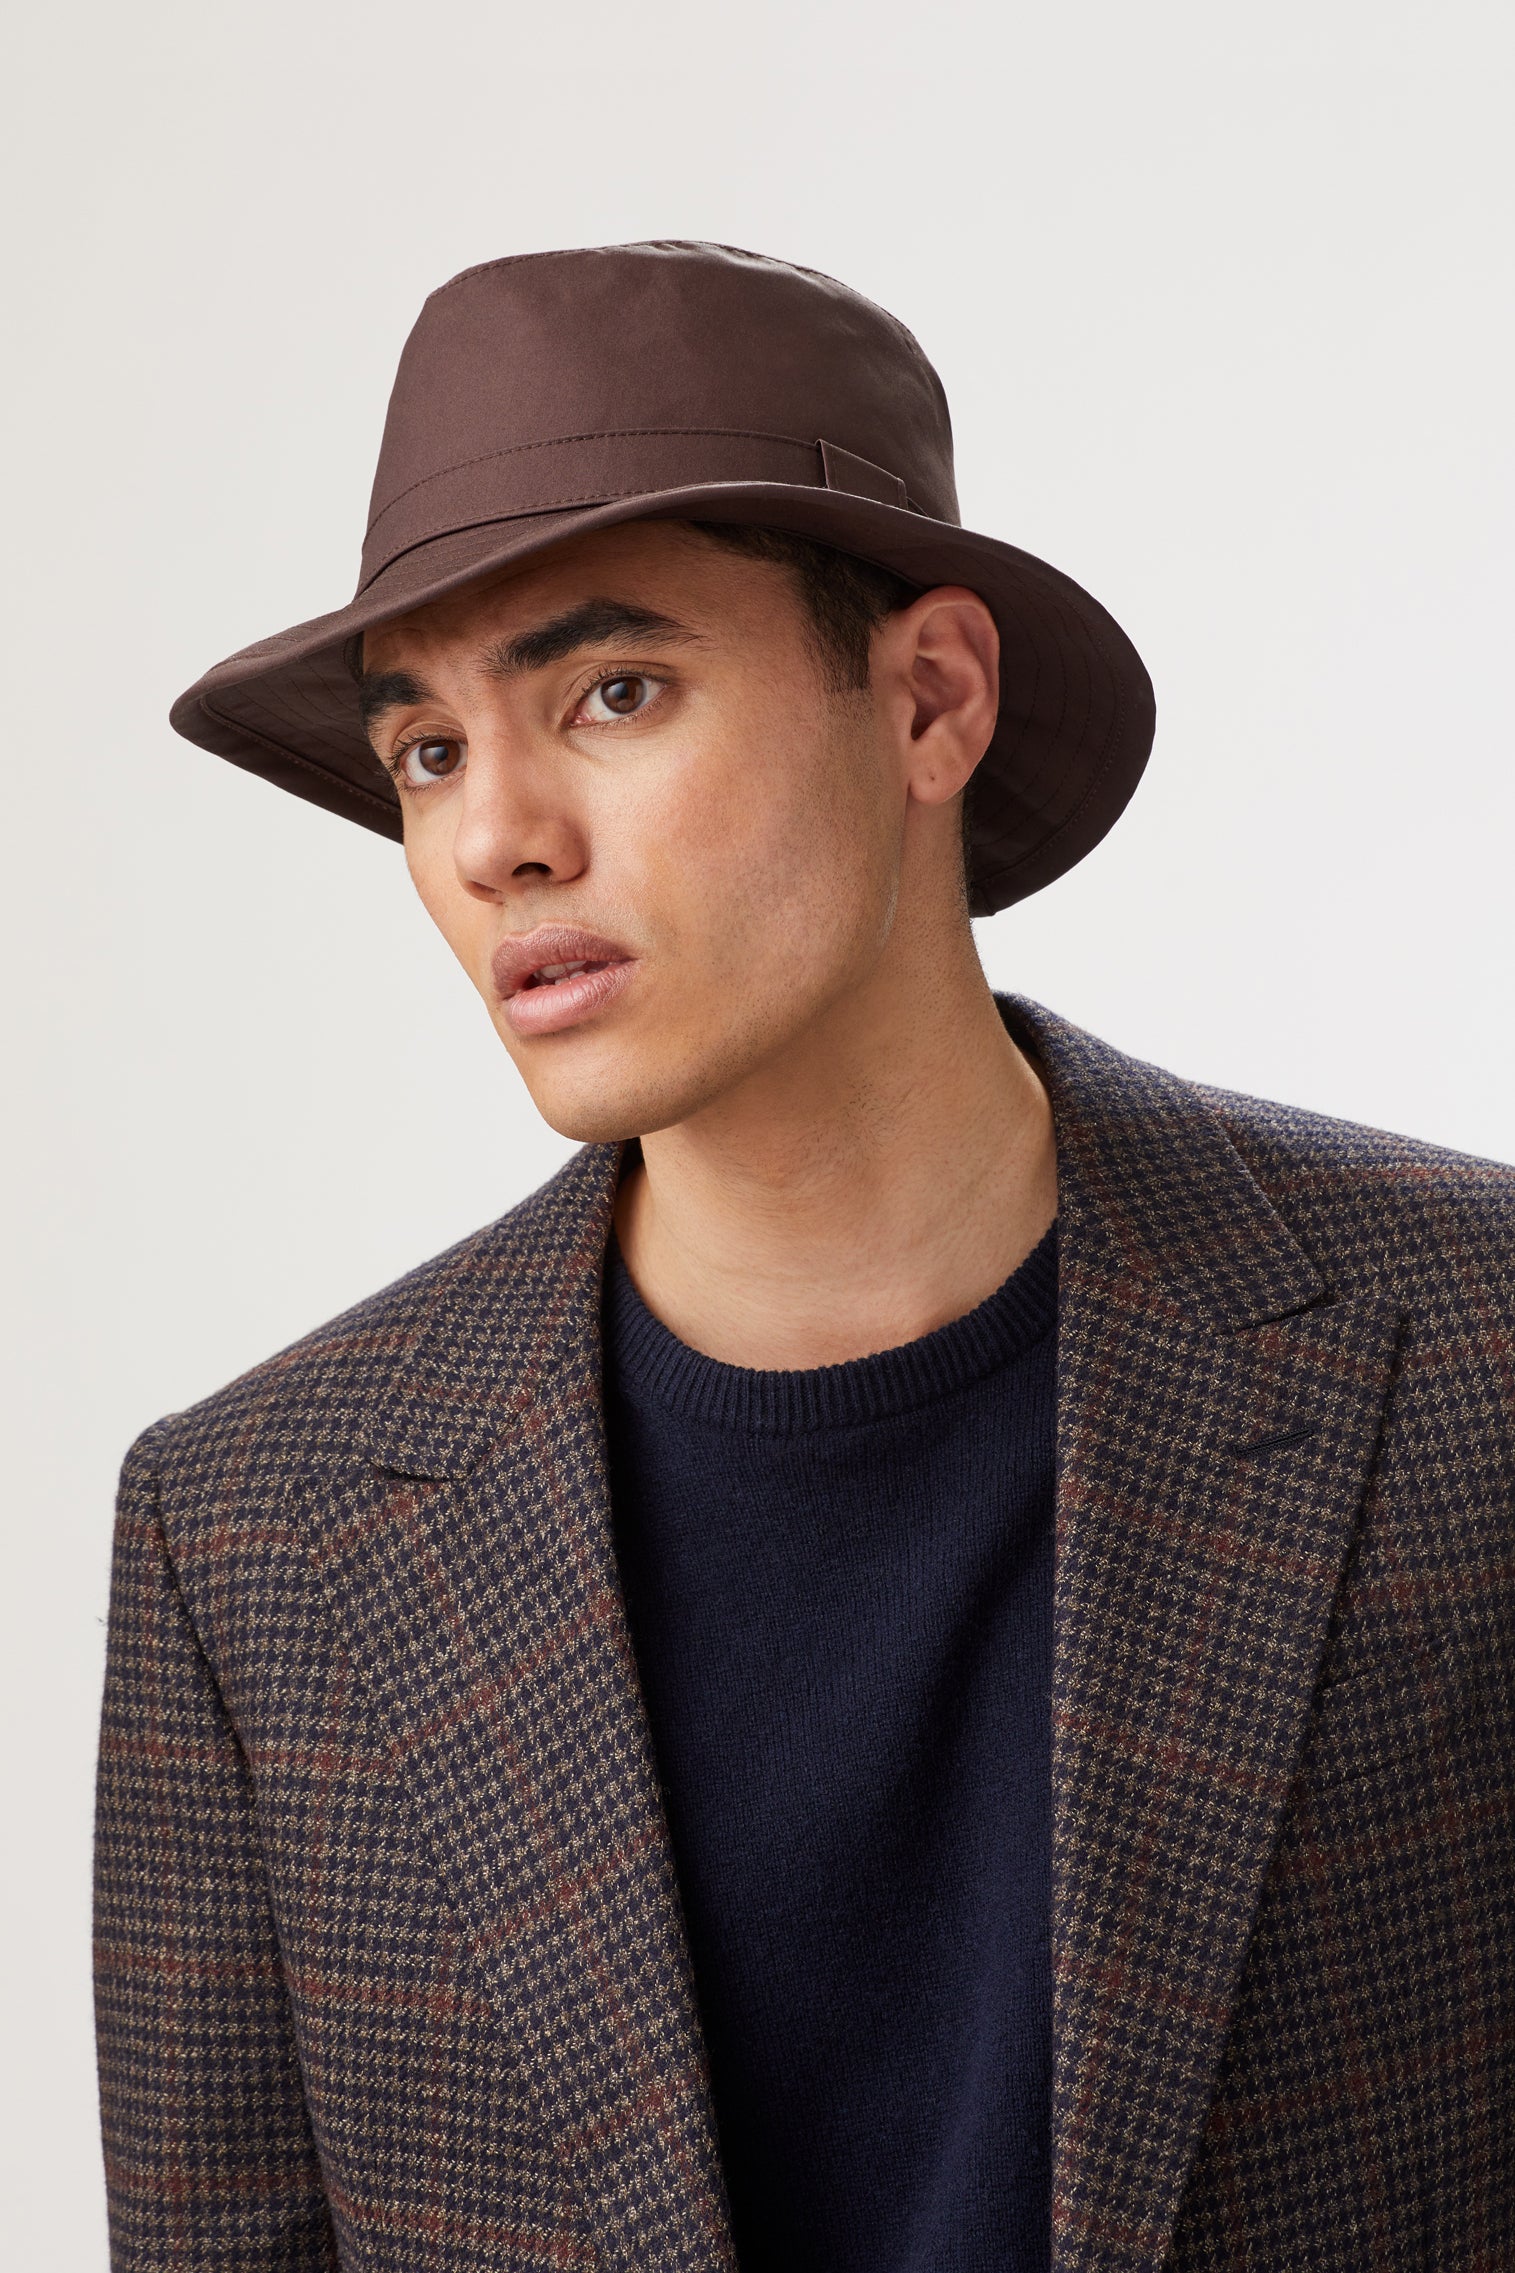 Tay GORE-TEX Hat - Hats for Round Face Shapes - Lock & Co. Hatters London UK